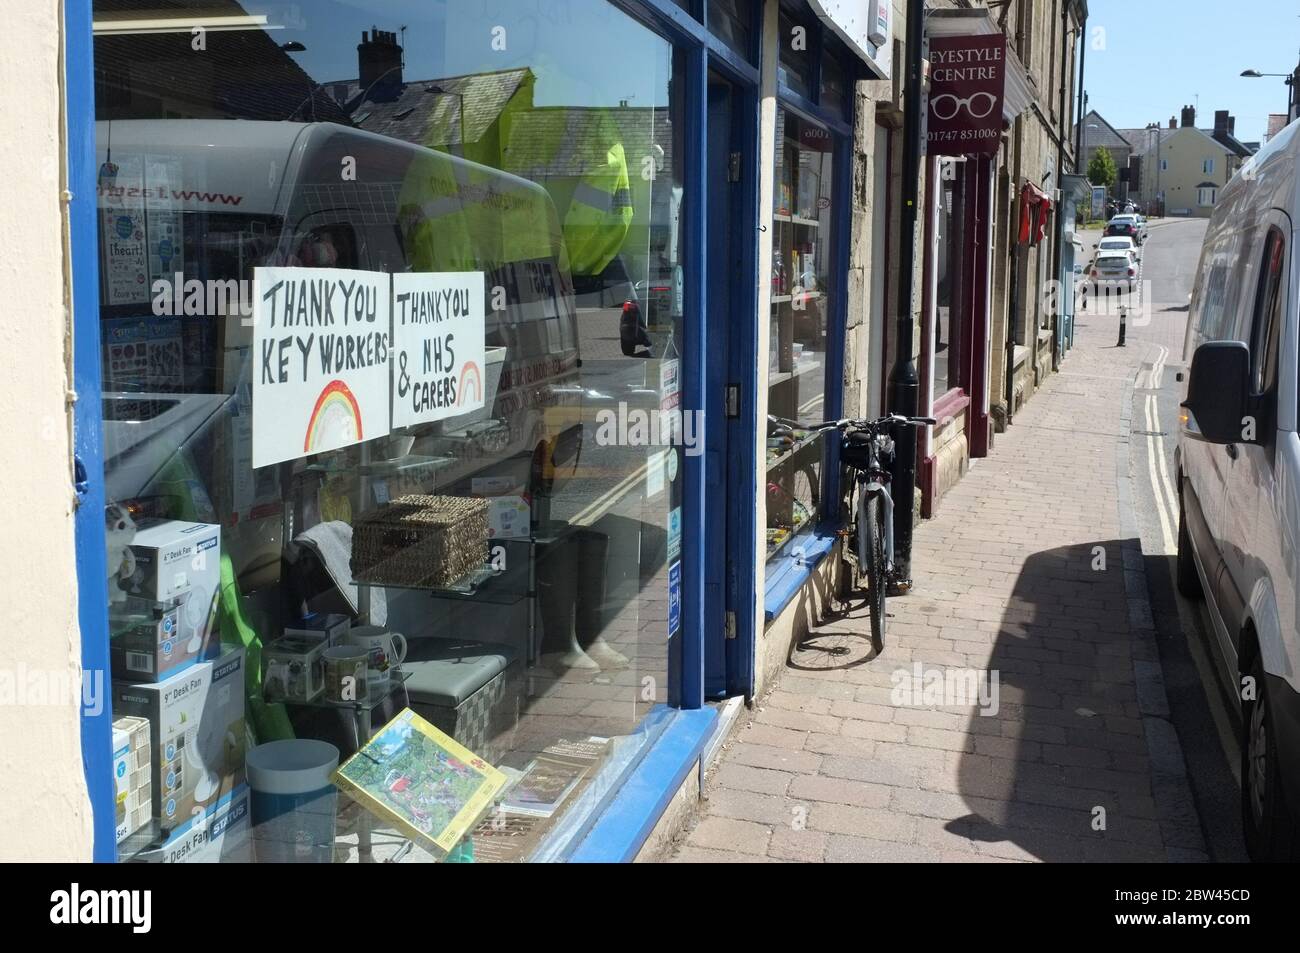 Thank you NHS Keyworkers homemade poster on a shop window in Shaftesbury, Dorset. May 2020. UK Stock Photo